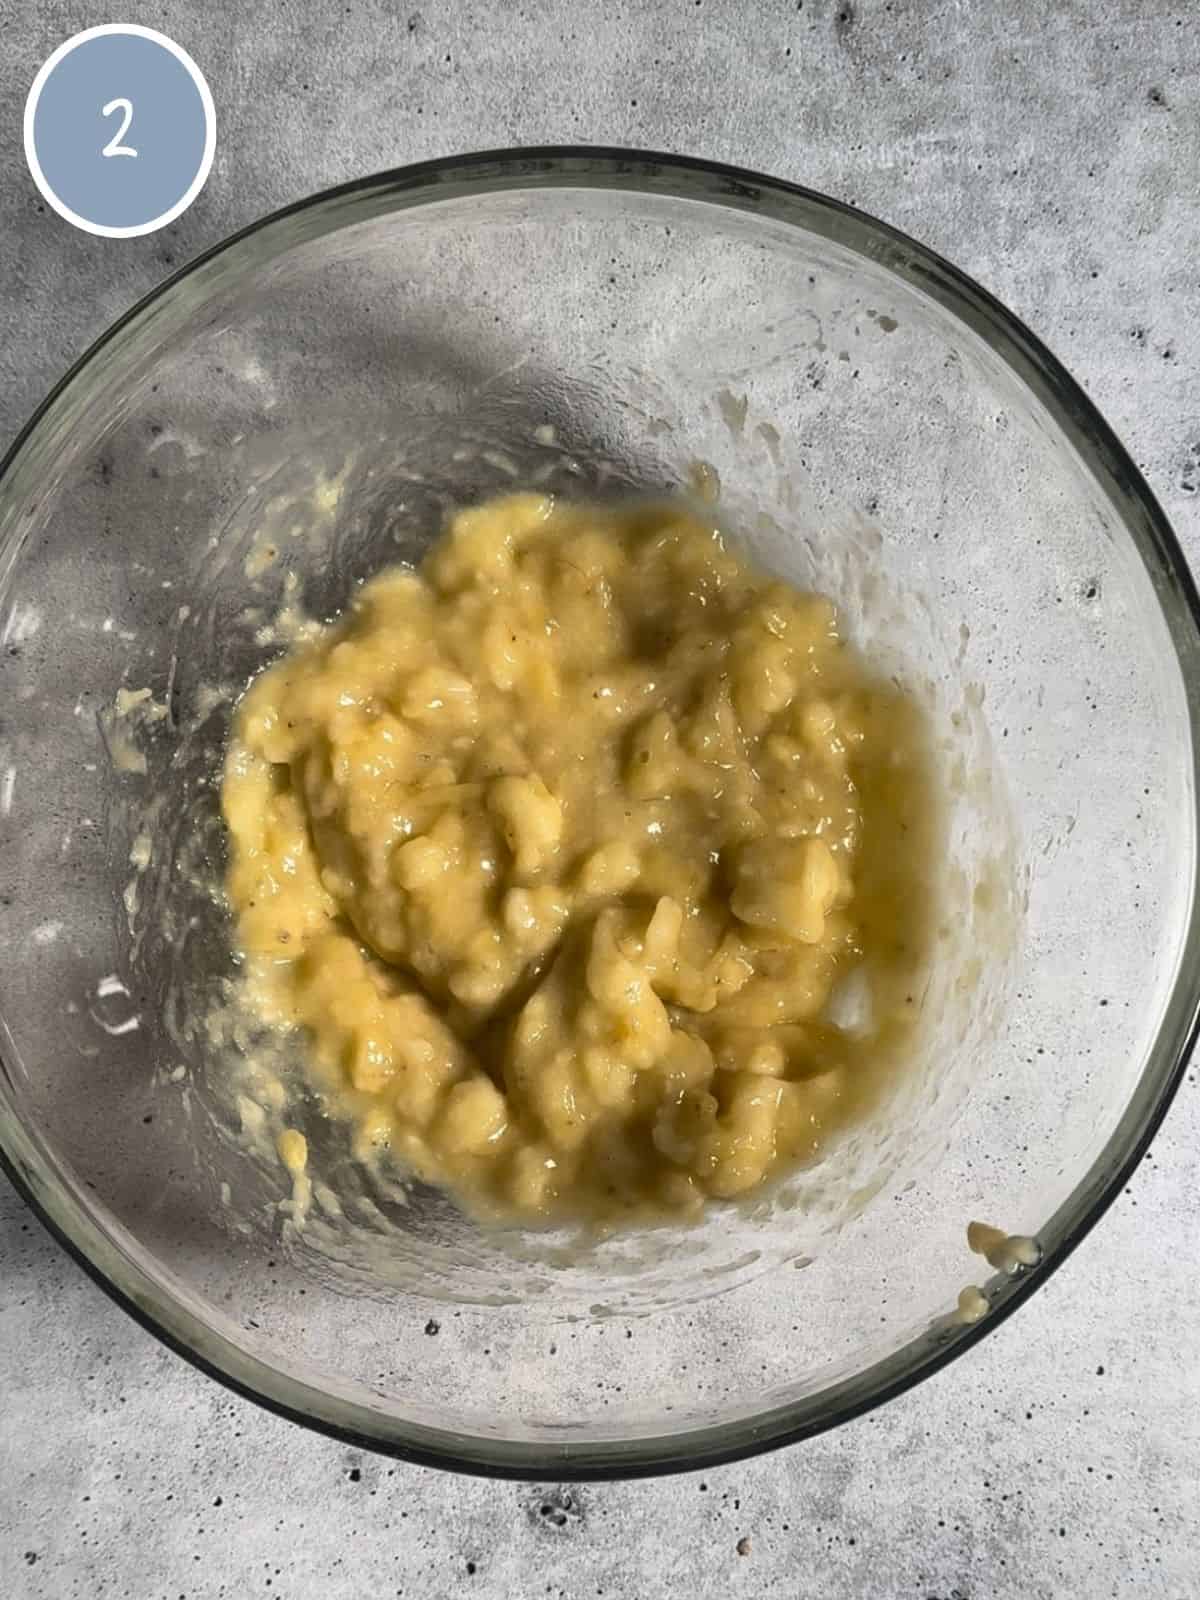 Mashed bananas in a bowl.